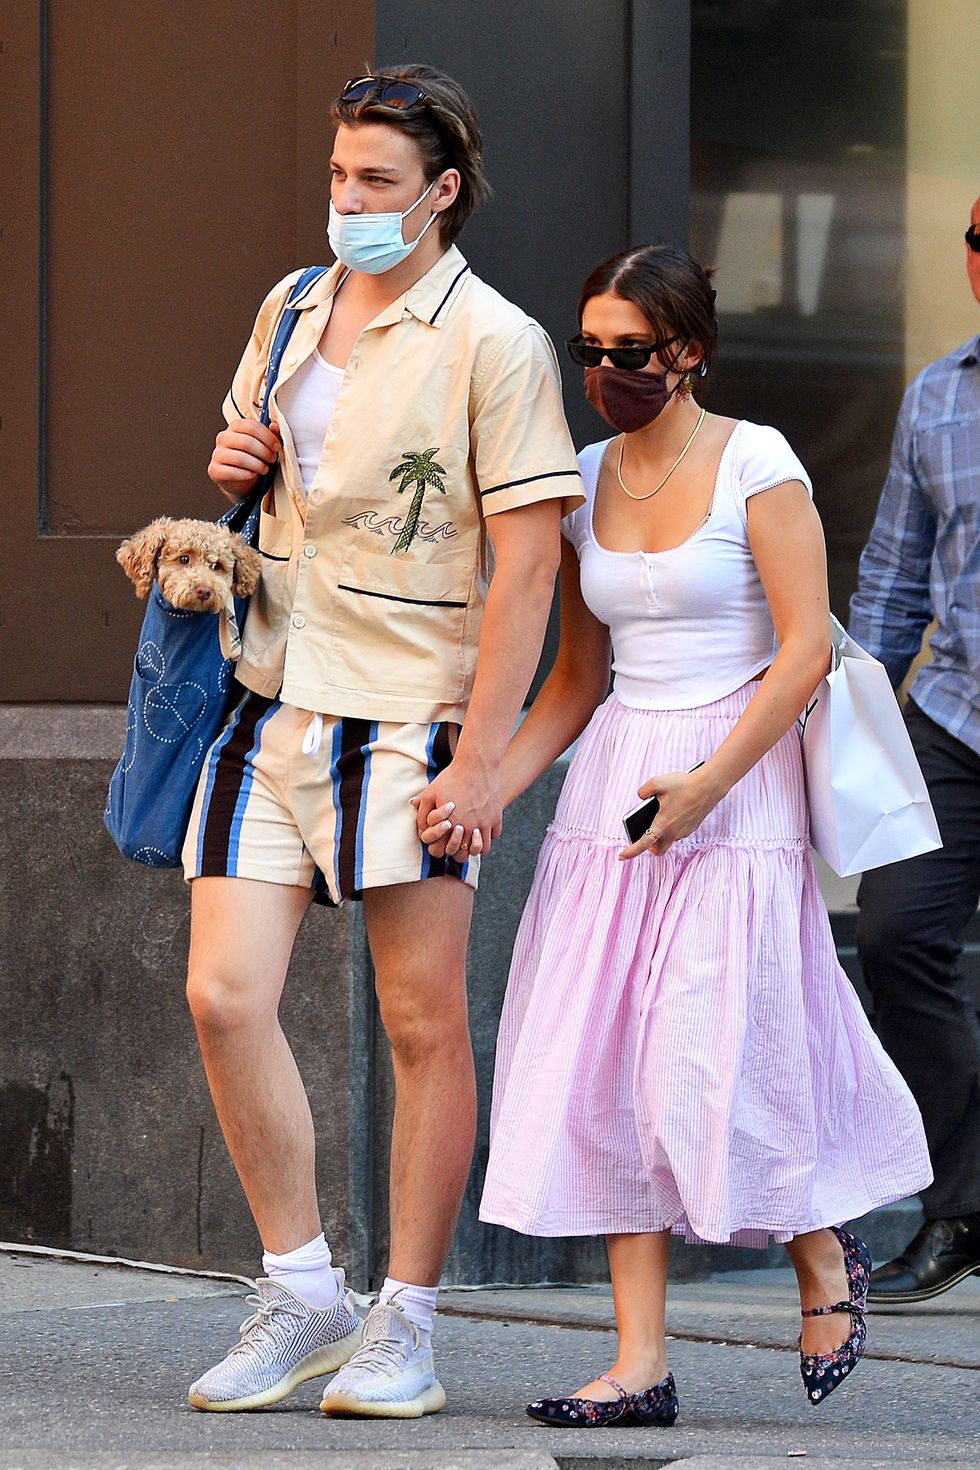 06172021 premium exclusive first pics millie bobby brown and jake bongiovi step out as a couple for the first time in new york city the 'stranger things' star held hands with the son of jon bon jovi while out on a stroll brown carried her pup in a tot and wore a white blouse, pink skirt, and flatssalestheimagedirectcom please bylinetheimagedirectcomexclusive please email salestheimagedirectcom for fees before use